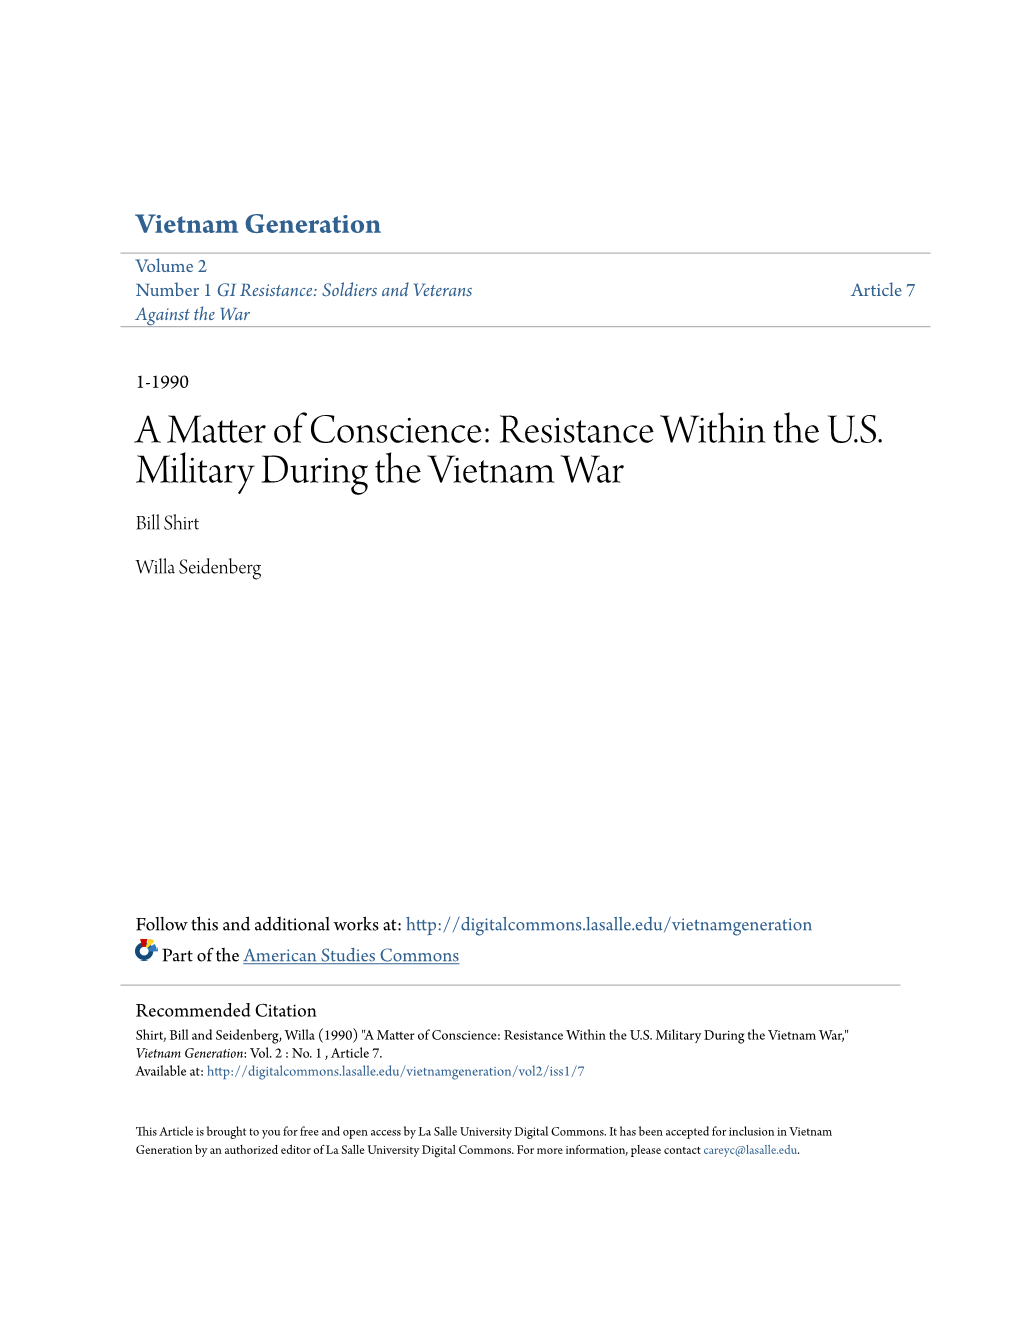 A Matter of Conscience: Resistance Within the U.S. Military During the Vietnam War Bill Shirt